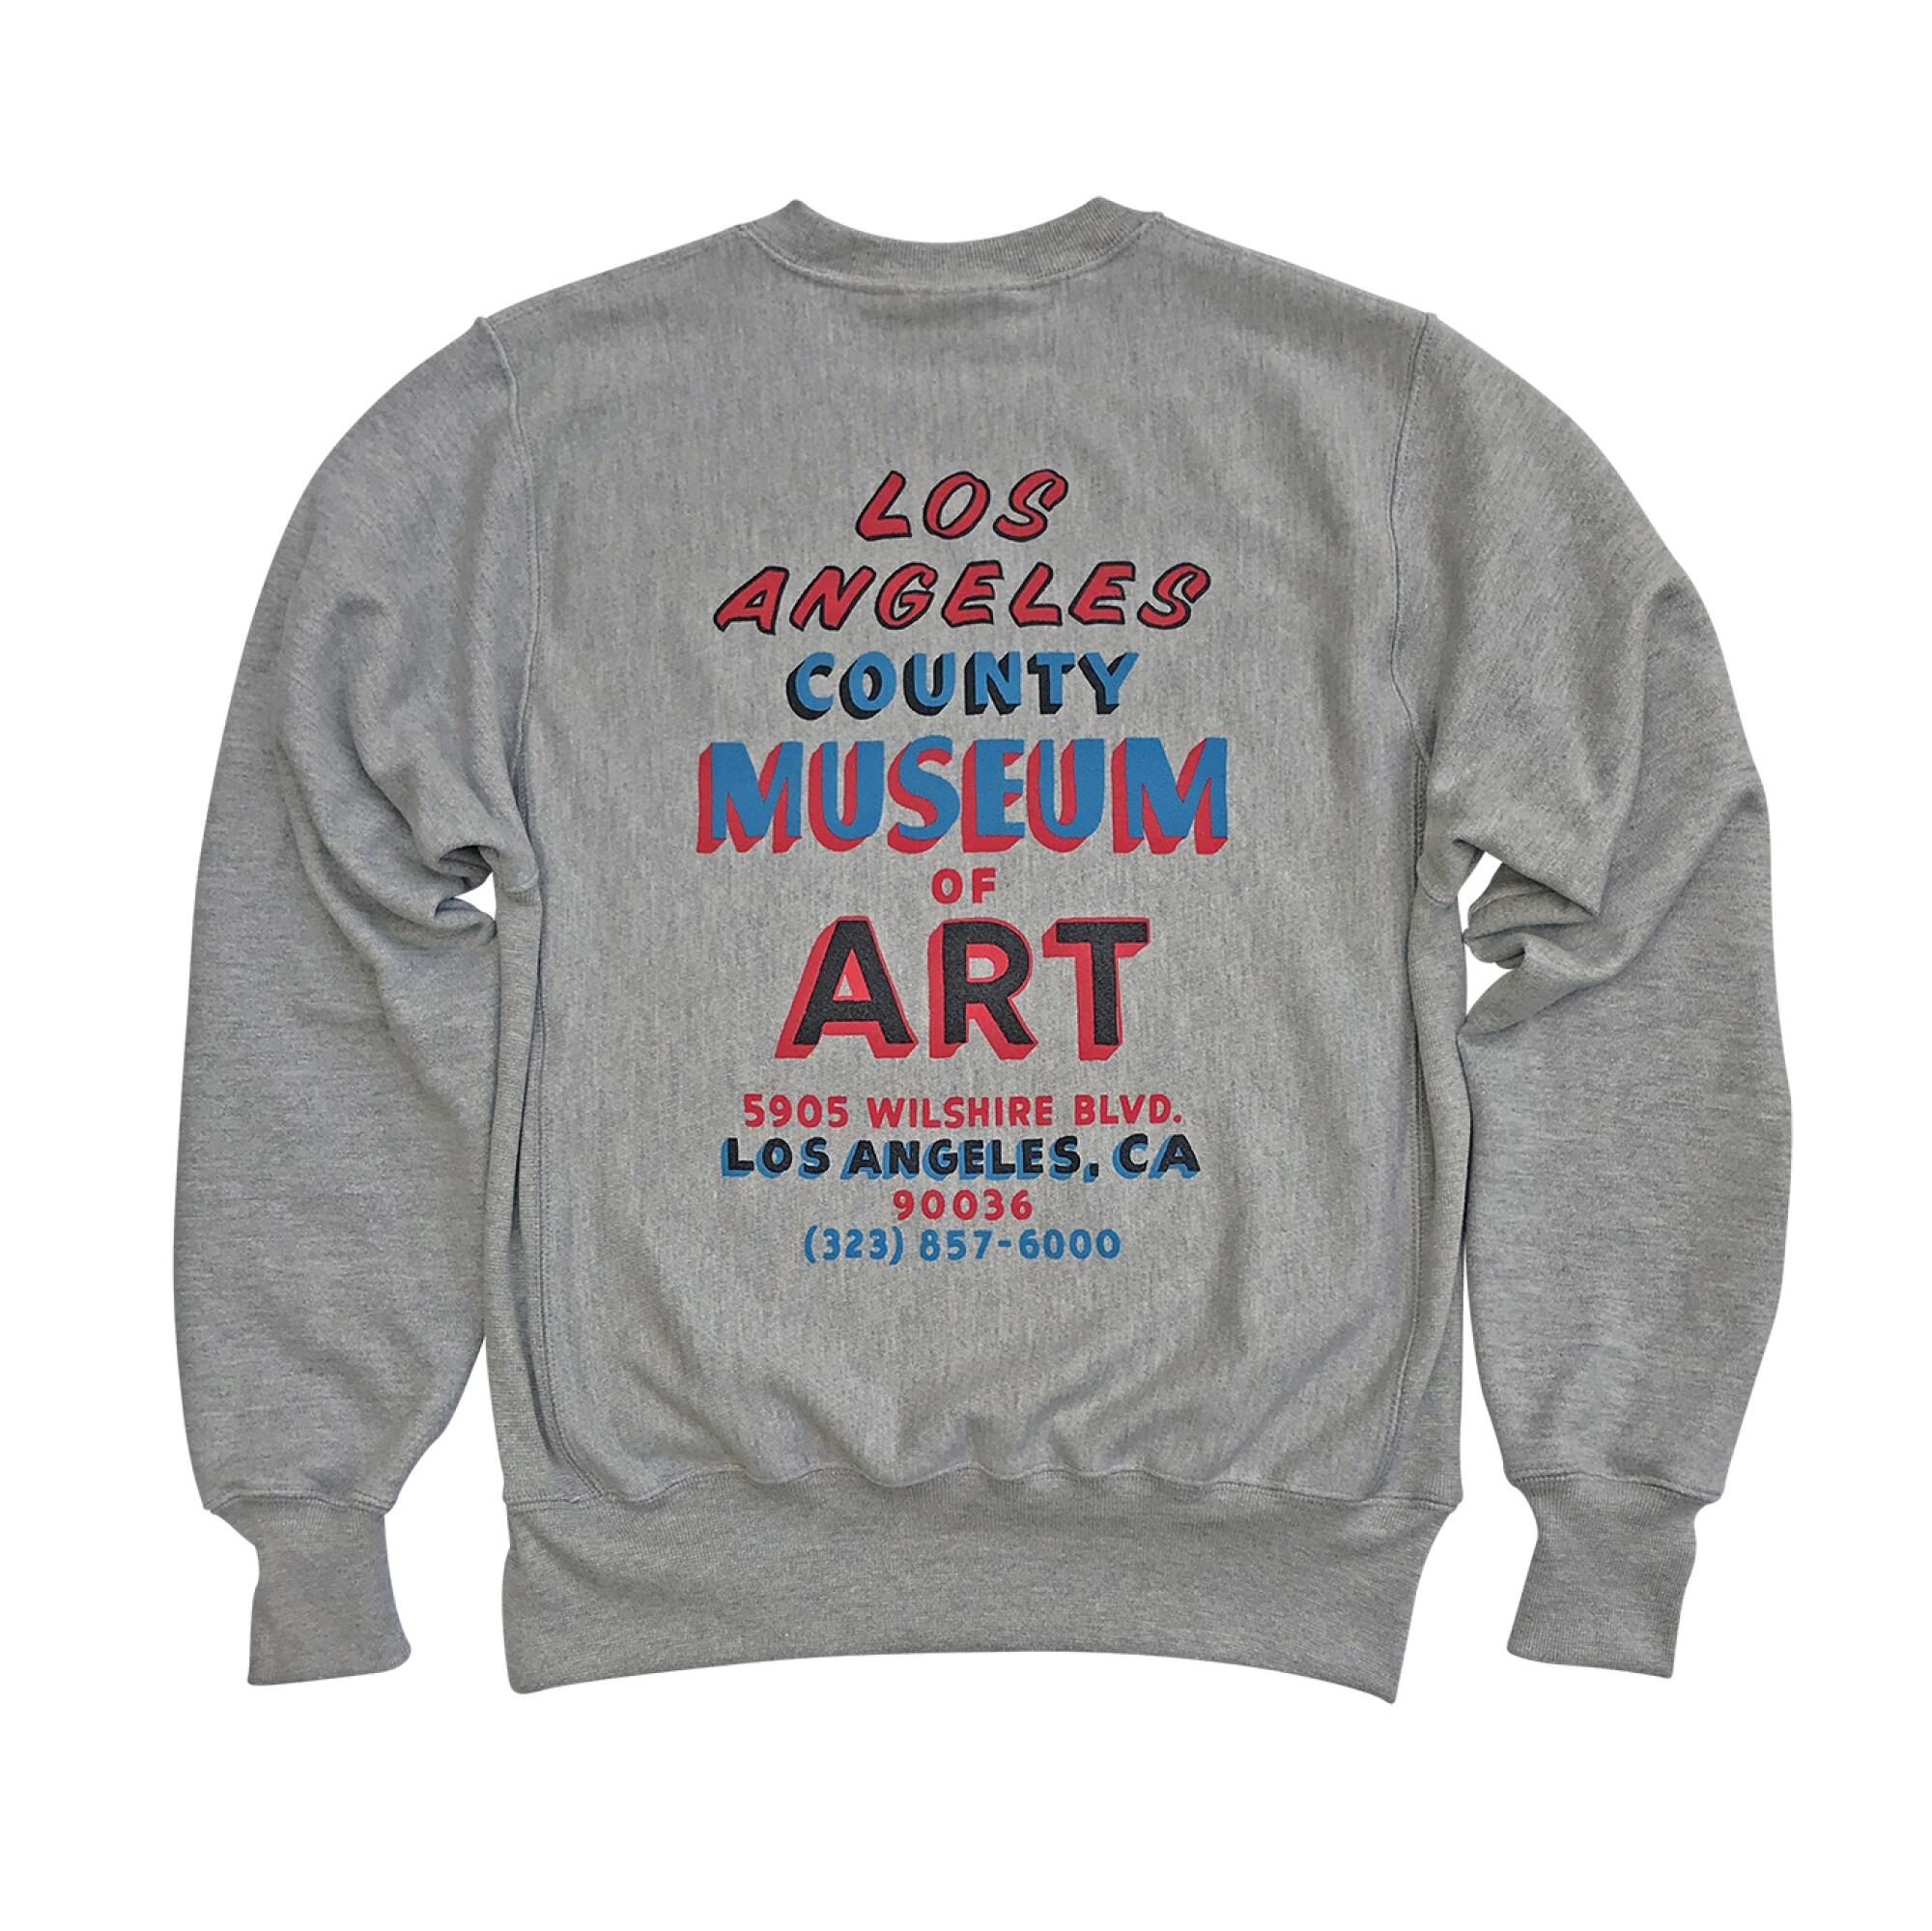 GIFT GUIDE - MERCH: LACMA Hand Painted Sweater